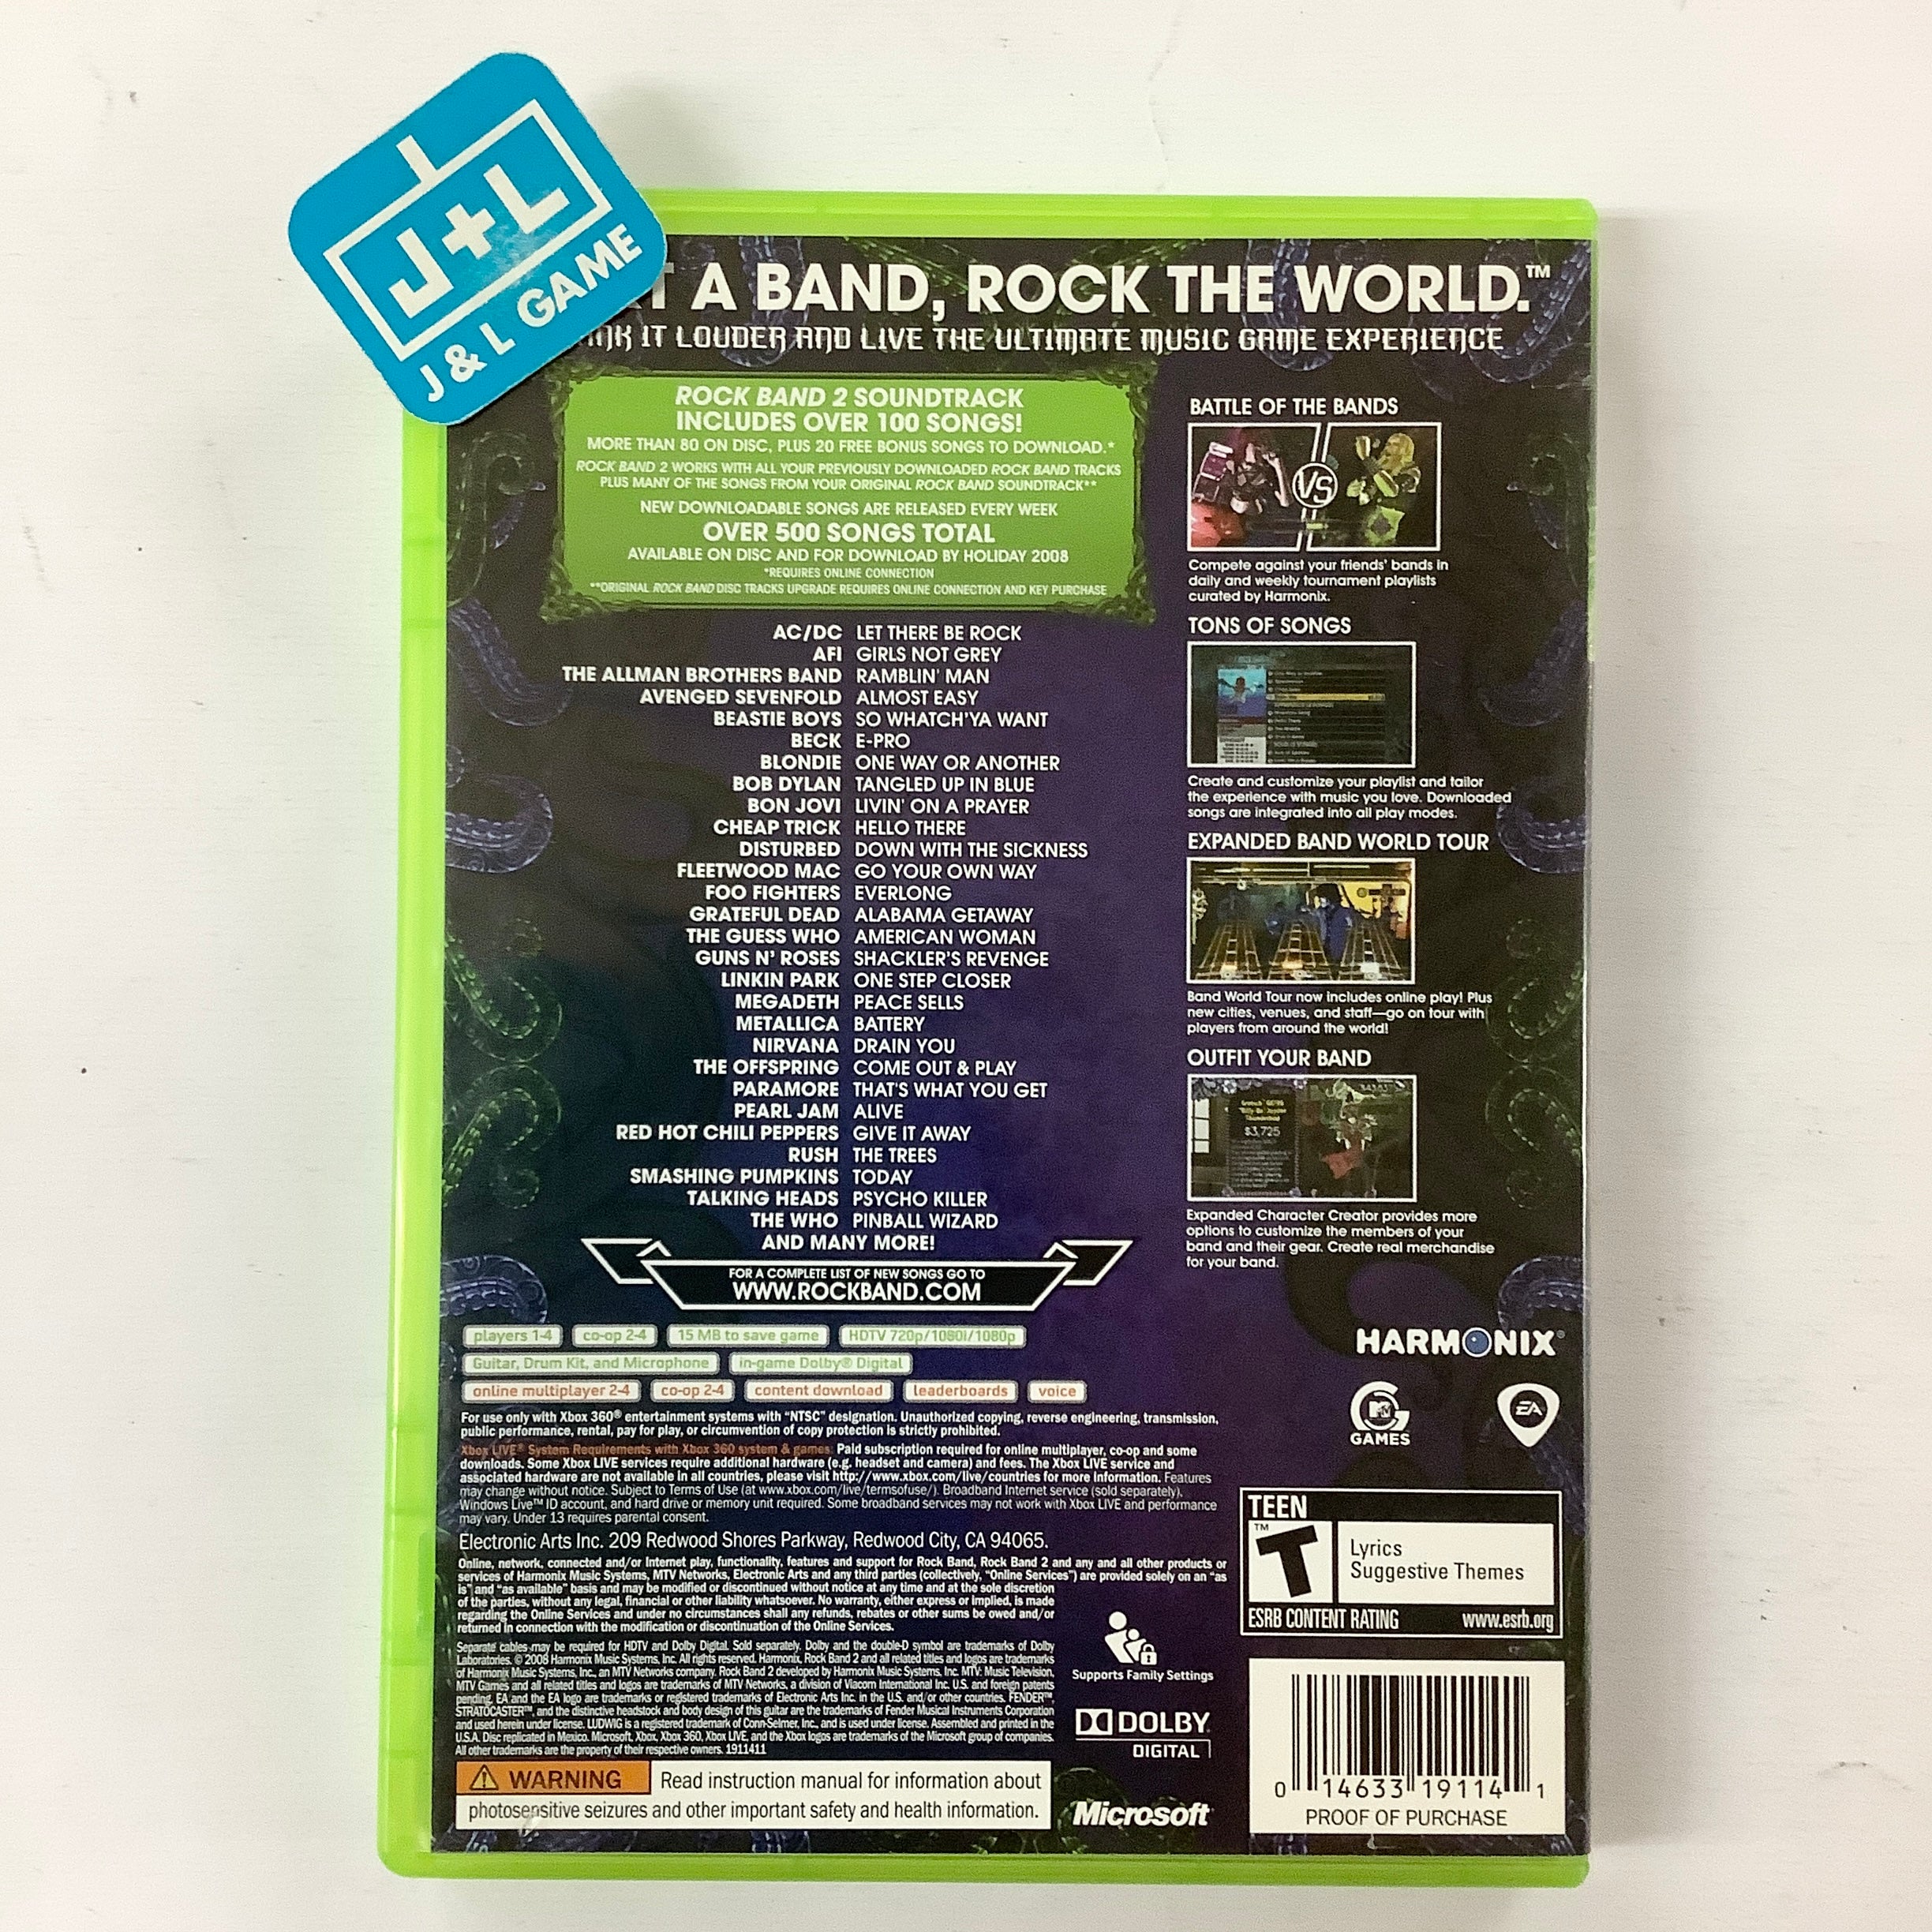 Rock Band 2 - Xbox 360 [Pre-Owned] Video Games MTV Games   